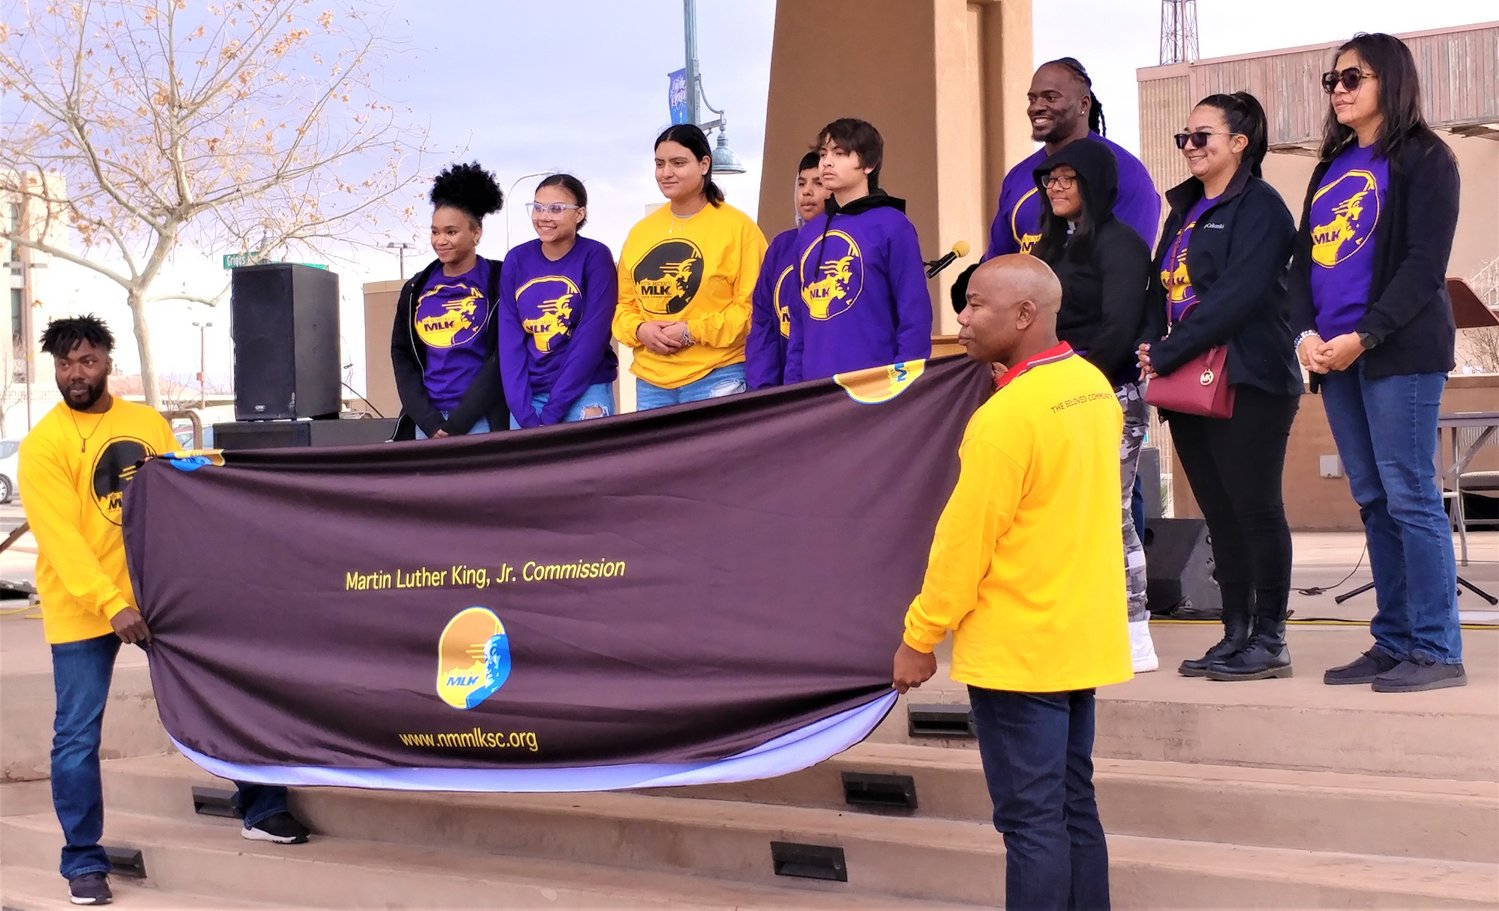 Jamar Cotton (back row) with local members of the Martin Luther King Jr. Commission at the Doña Ana County NAACP’s Martin Luther King Jan. 15 rally at Plaza de Las Cruces.